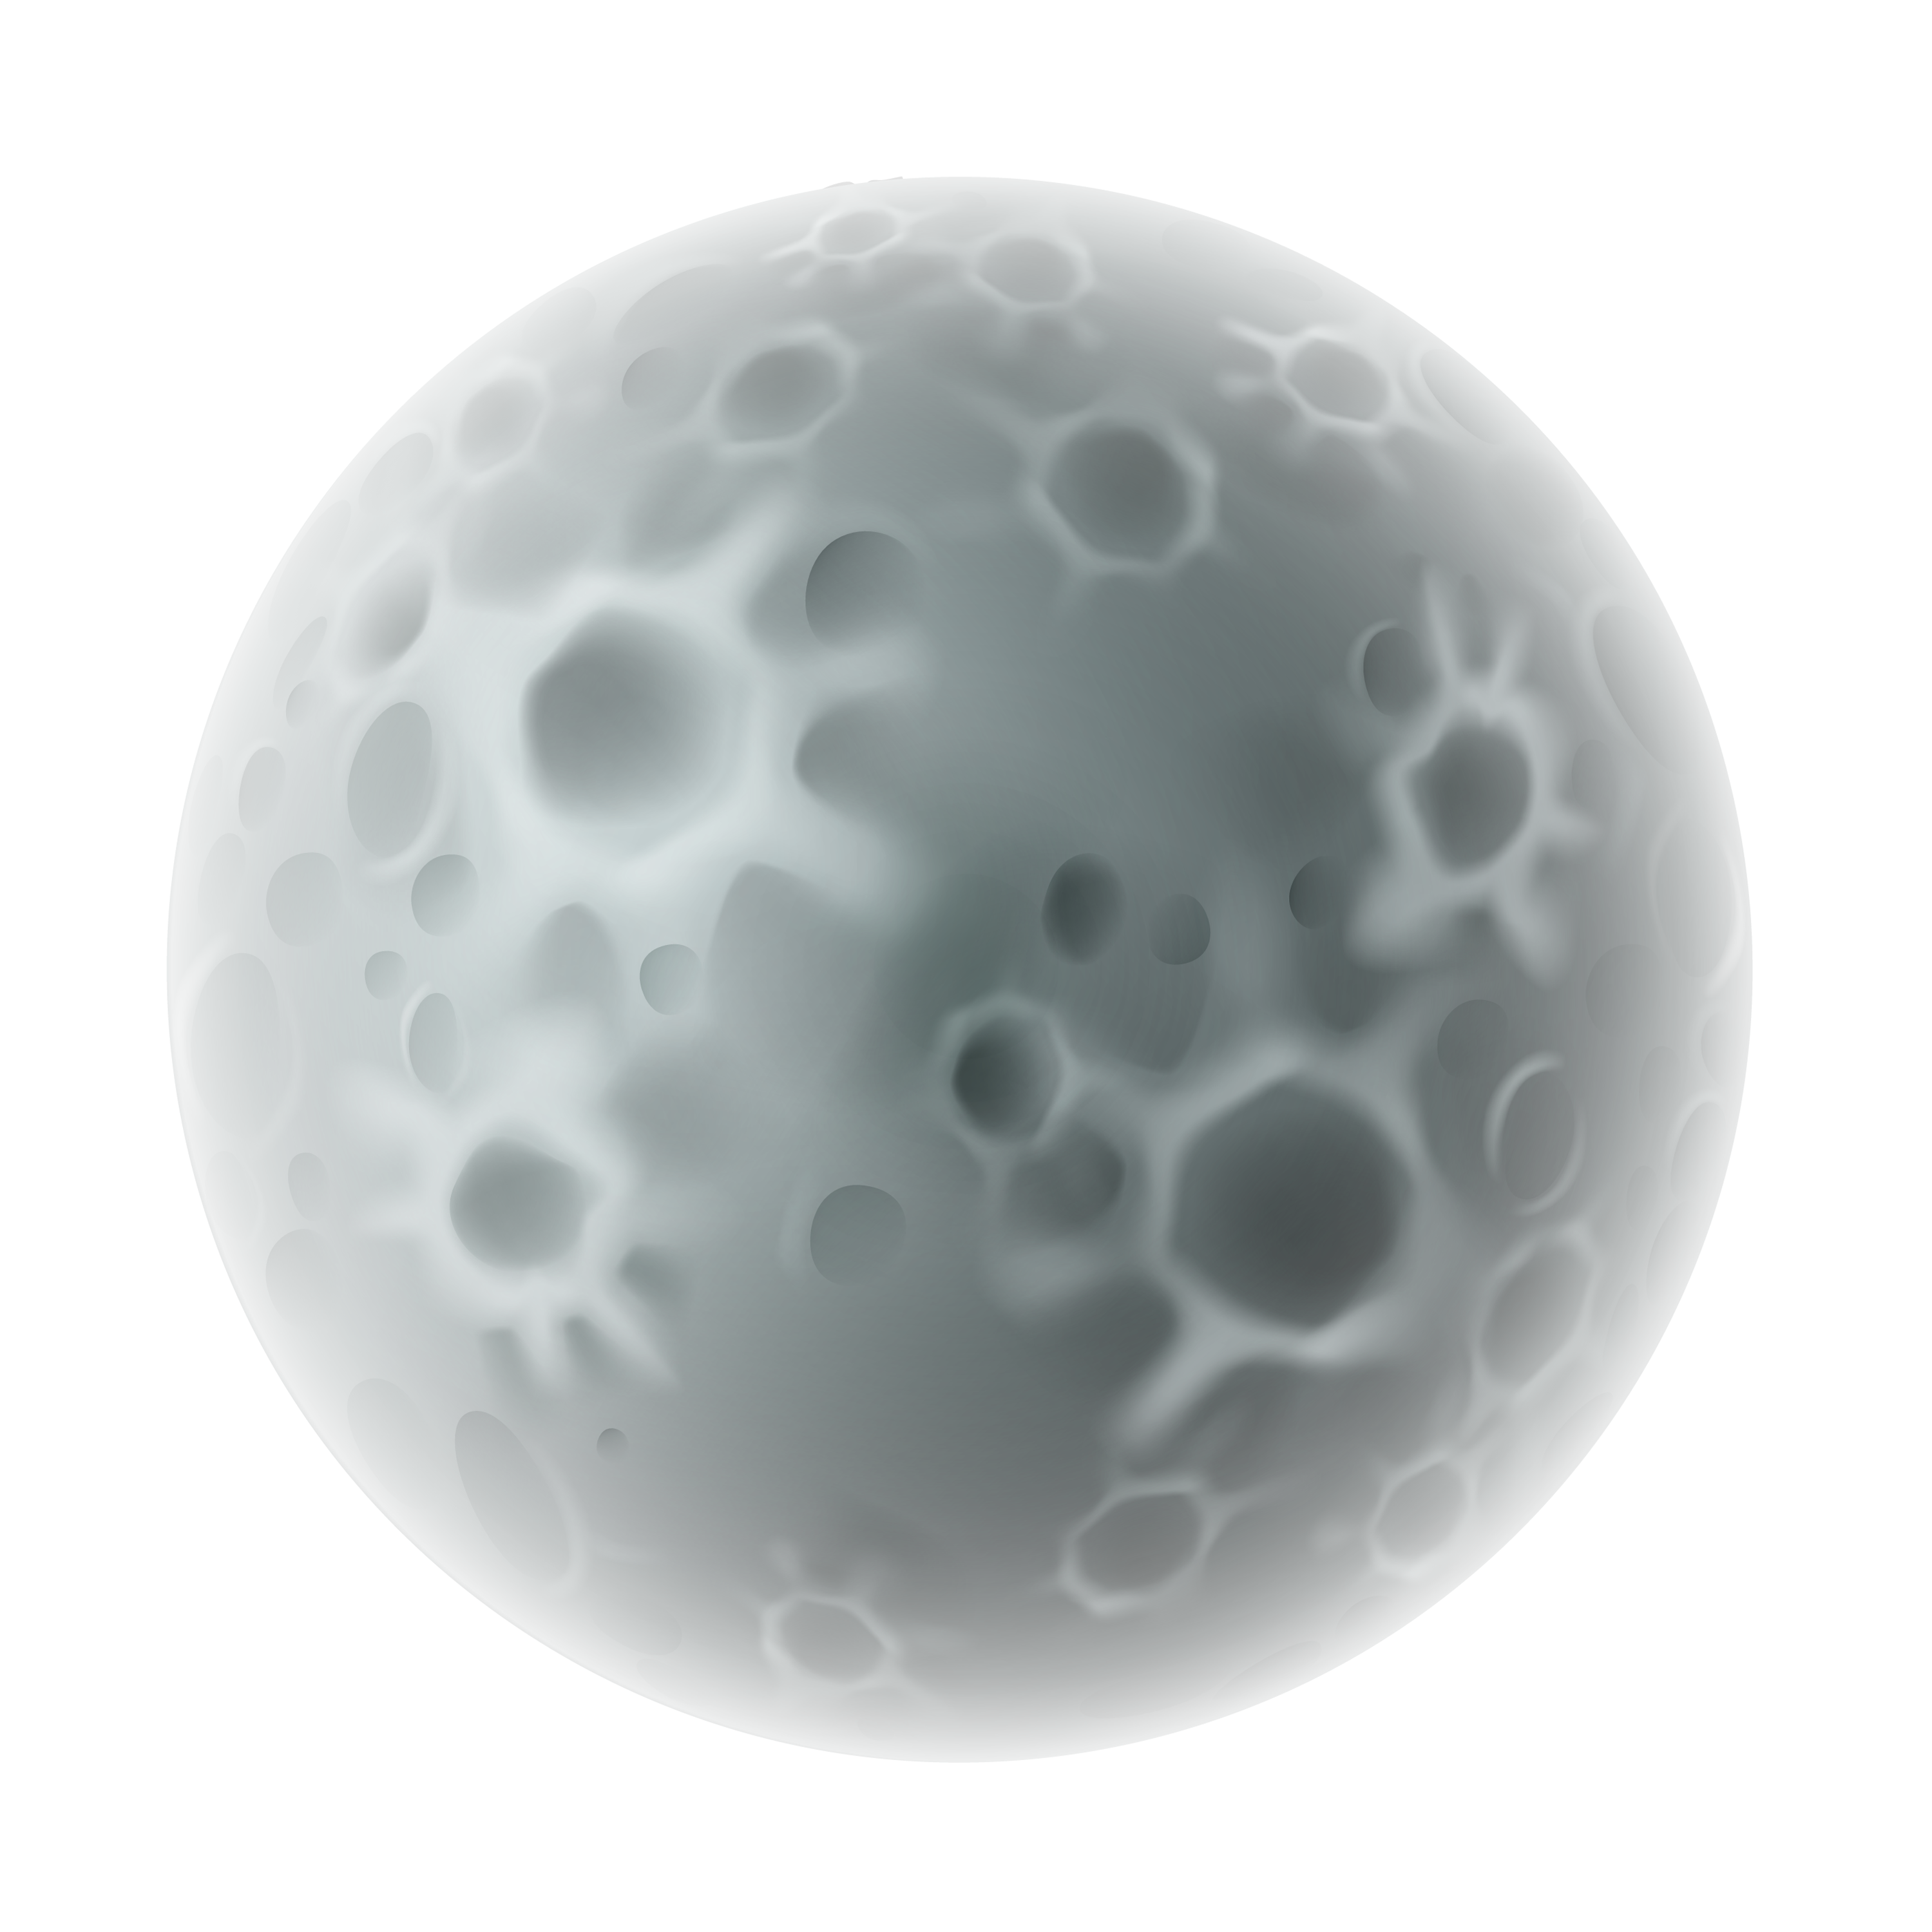 A White Moon With Holes In It